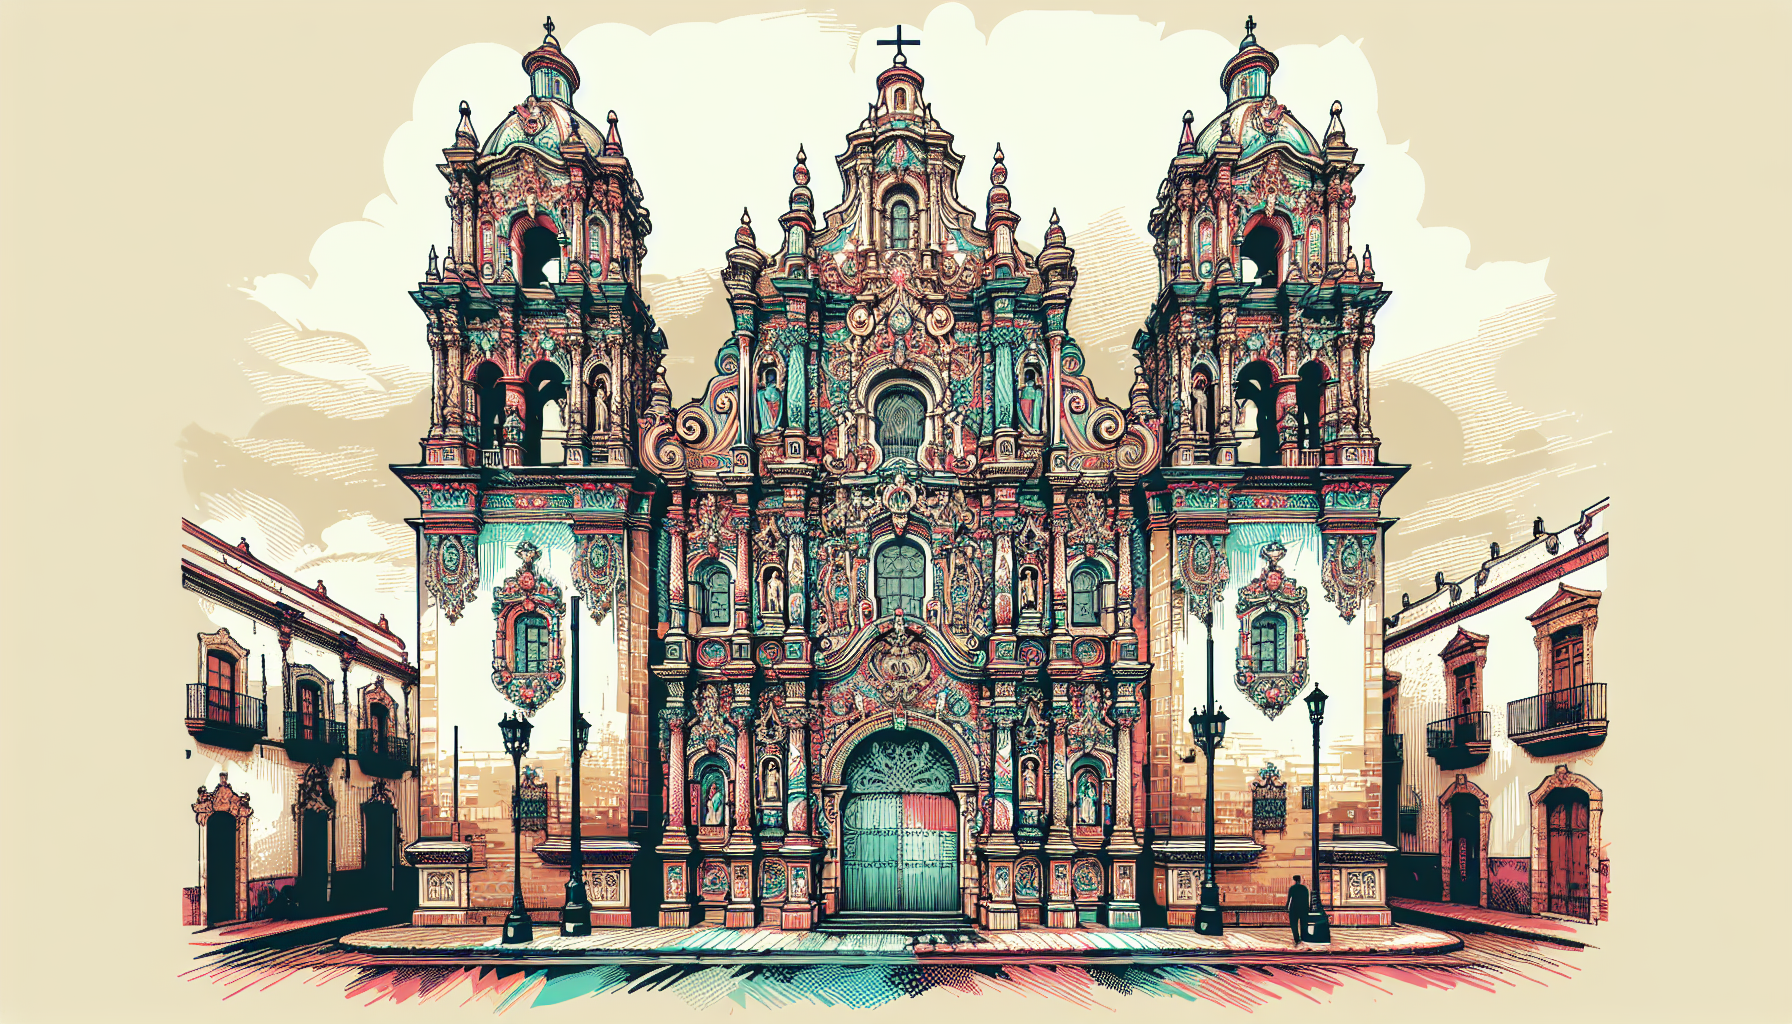 Create an image of a stunning, intricate old church in Chihuahua, Mexico showcasing its beautiful architecture and historical significance as a cultural heritage site. Capture the details of the churc